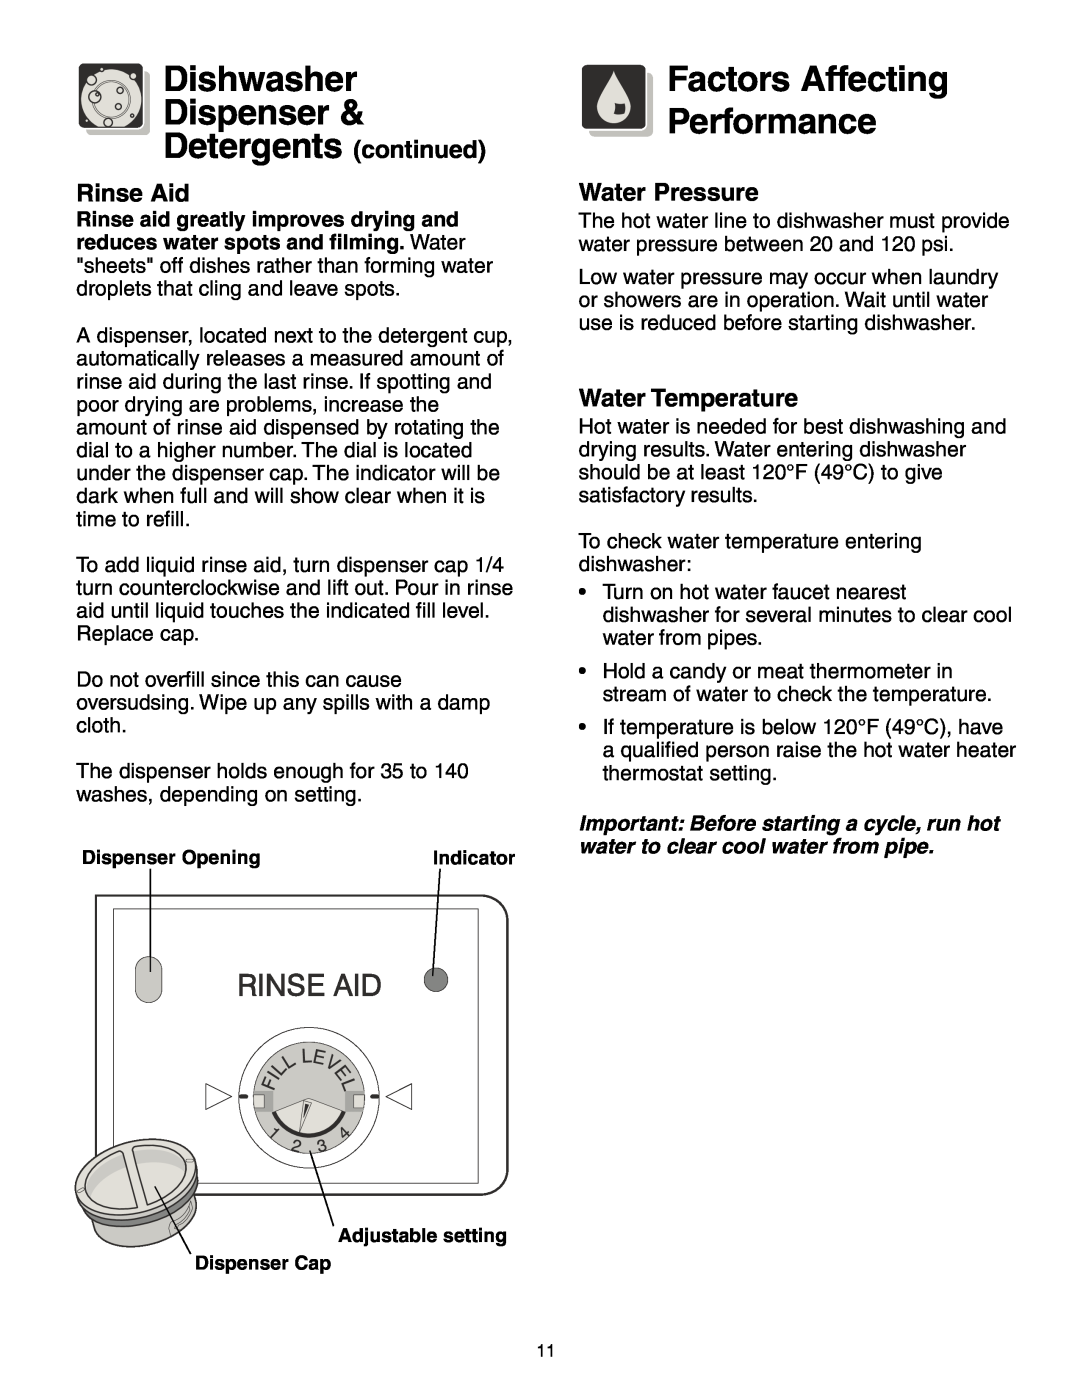 Frigidaire 950 Series warranty Dishwasher Dispenser & Detergents continued, Factors Affecting Performance, Rinse Aid 